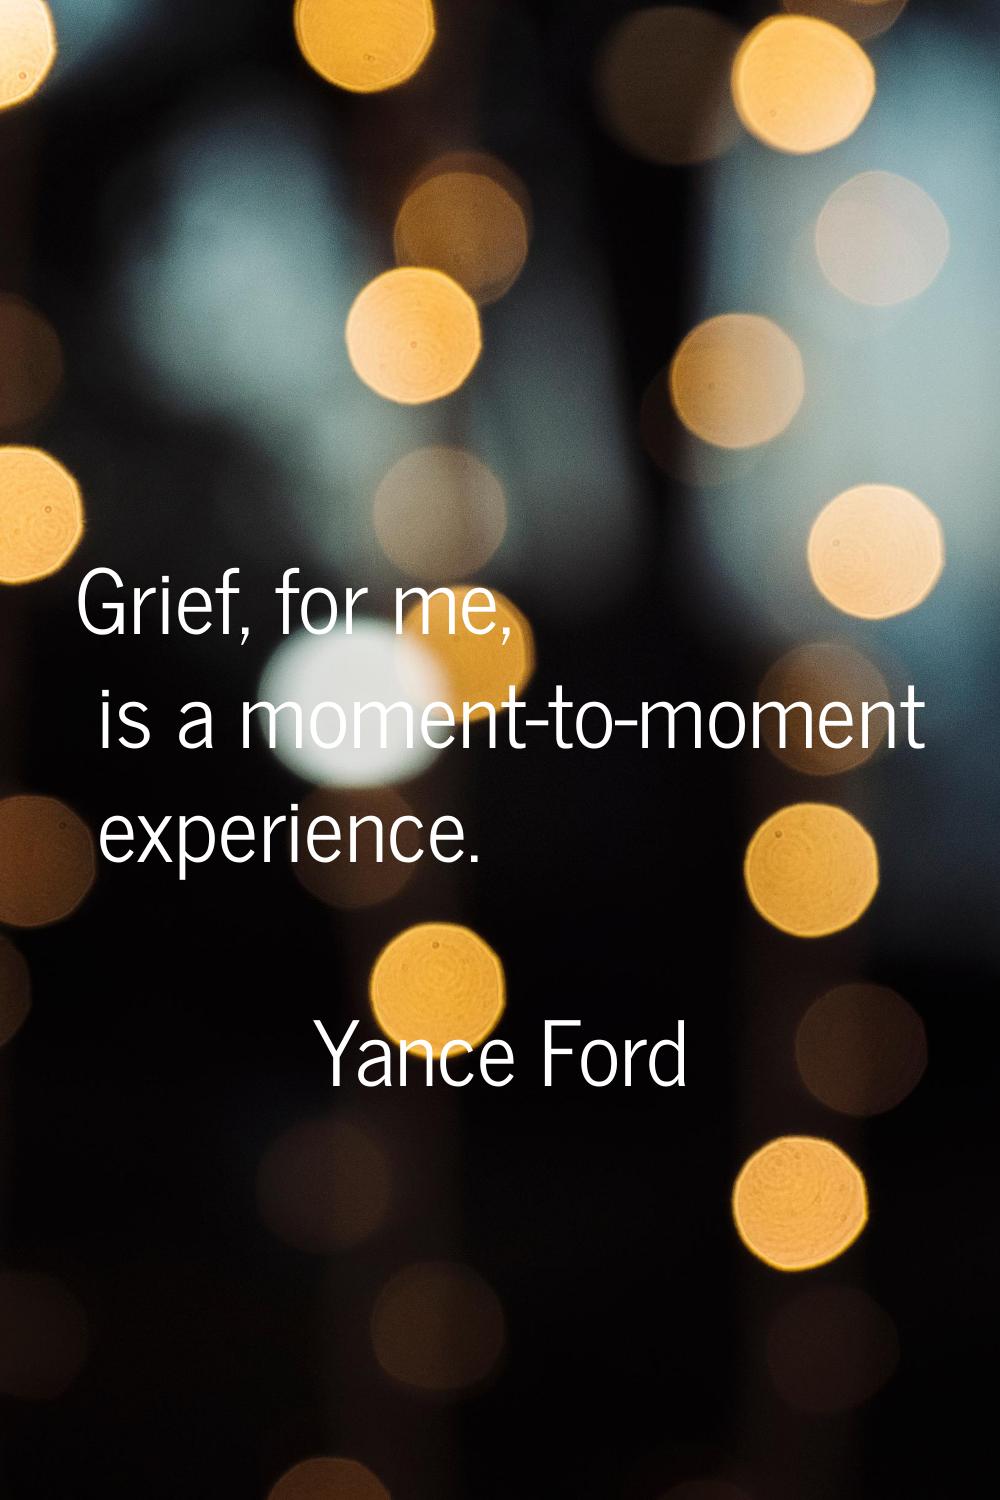 Grief, for me, is a moment-to-moment experience.